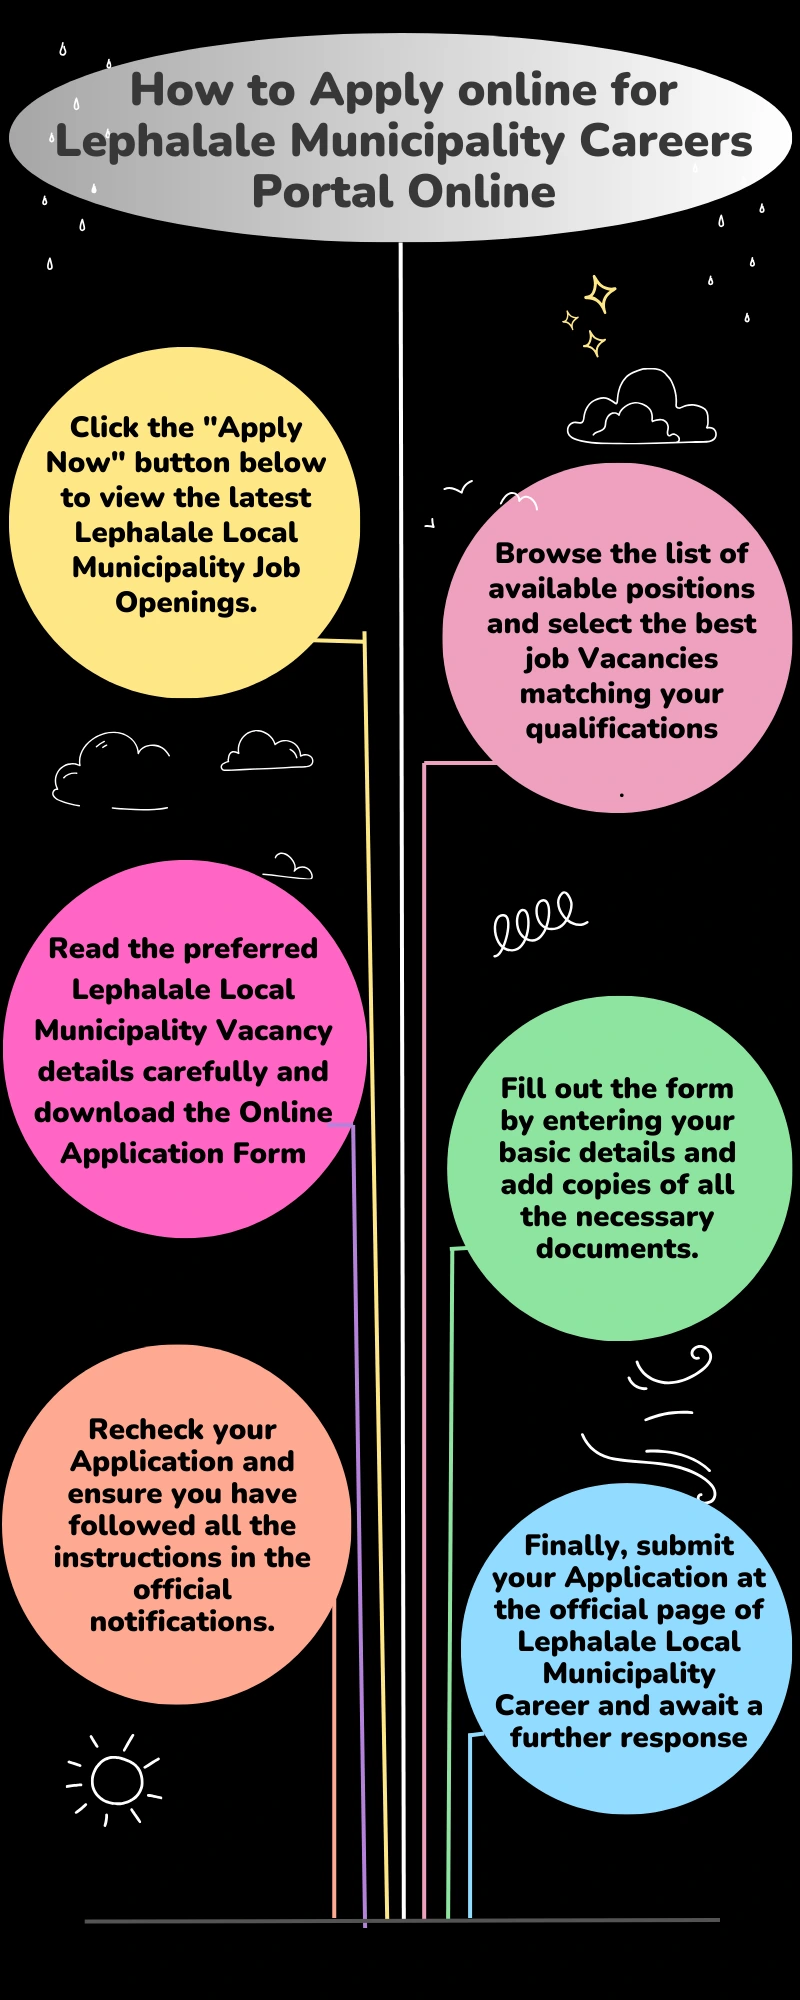 How to Apply online for Lephalale Municipality Careers Portal Online